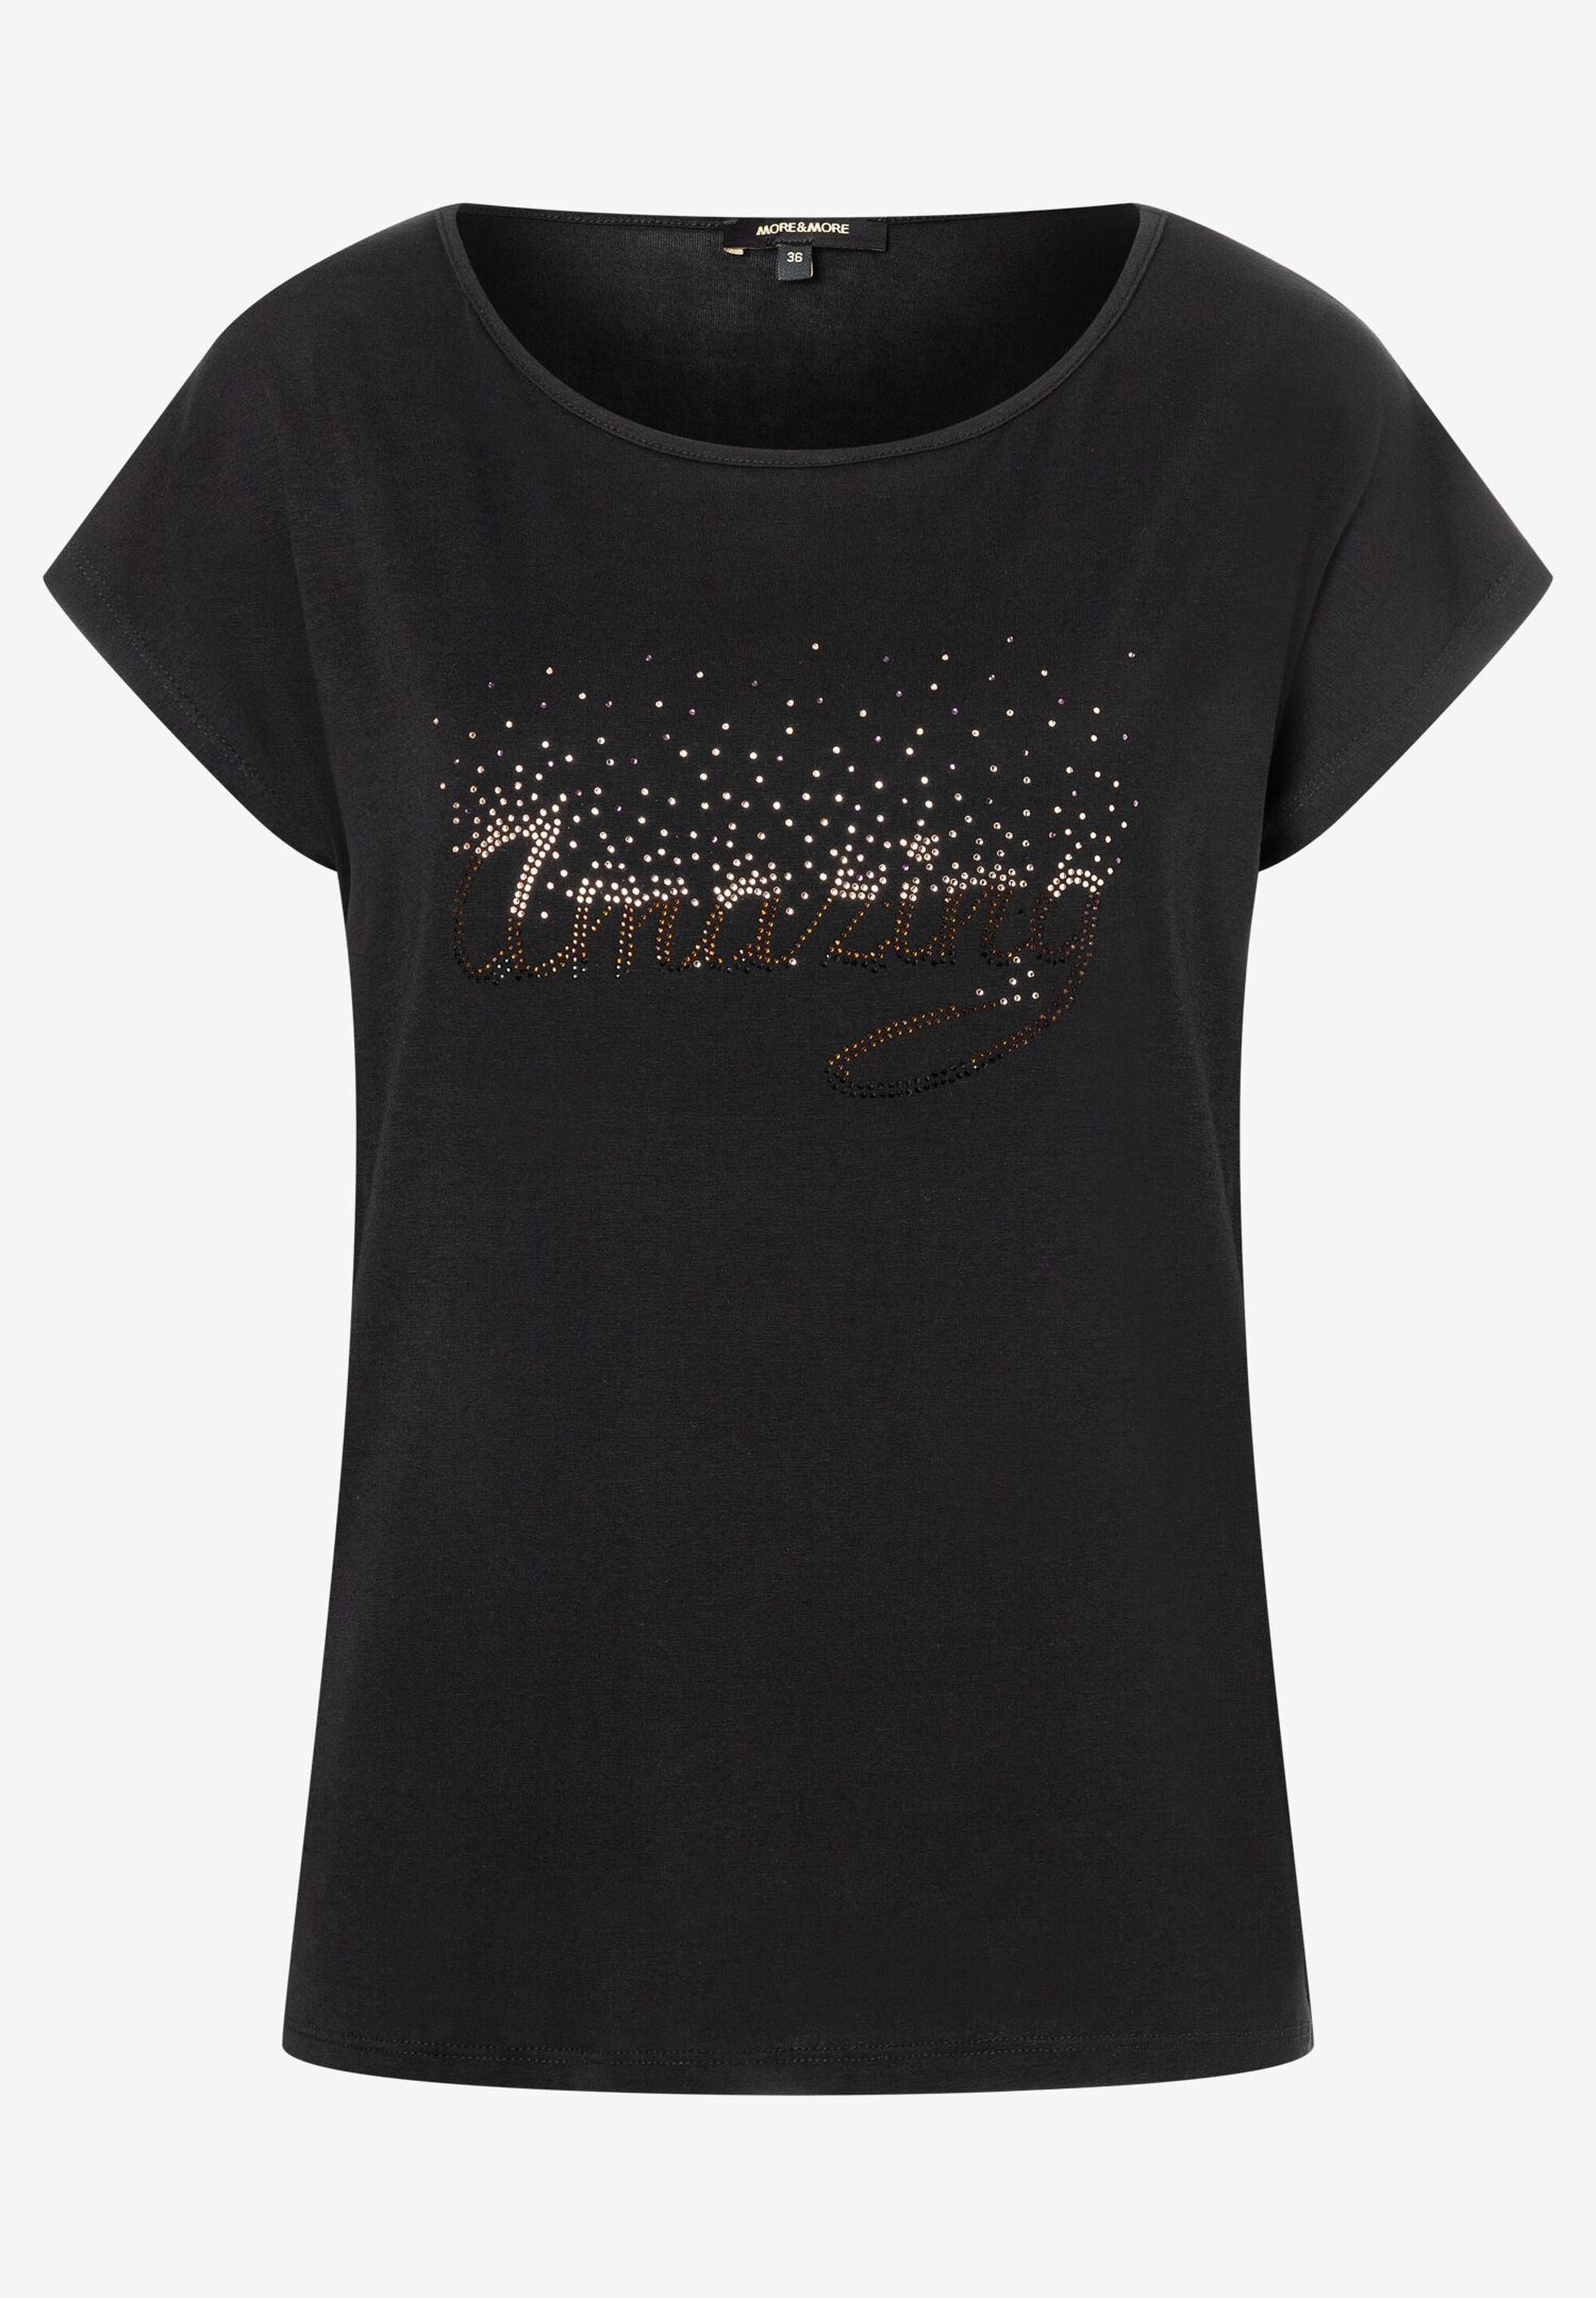 Black Short Sleeve With Strass Lettering T-Shirt_04